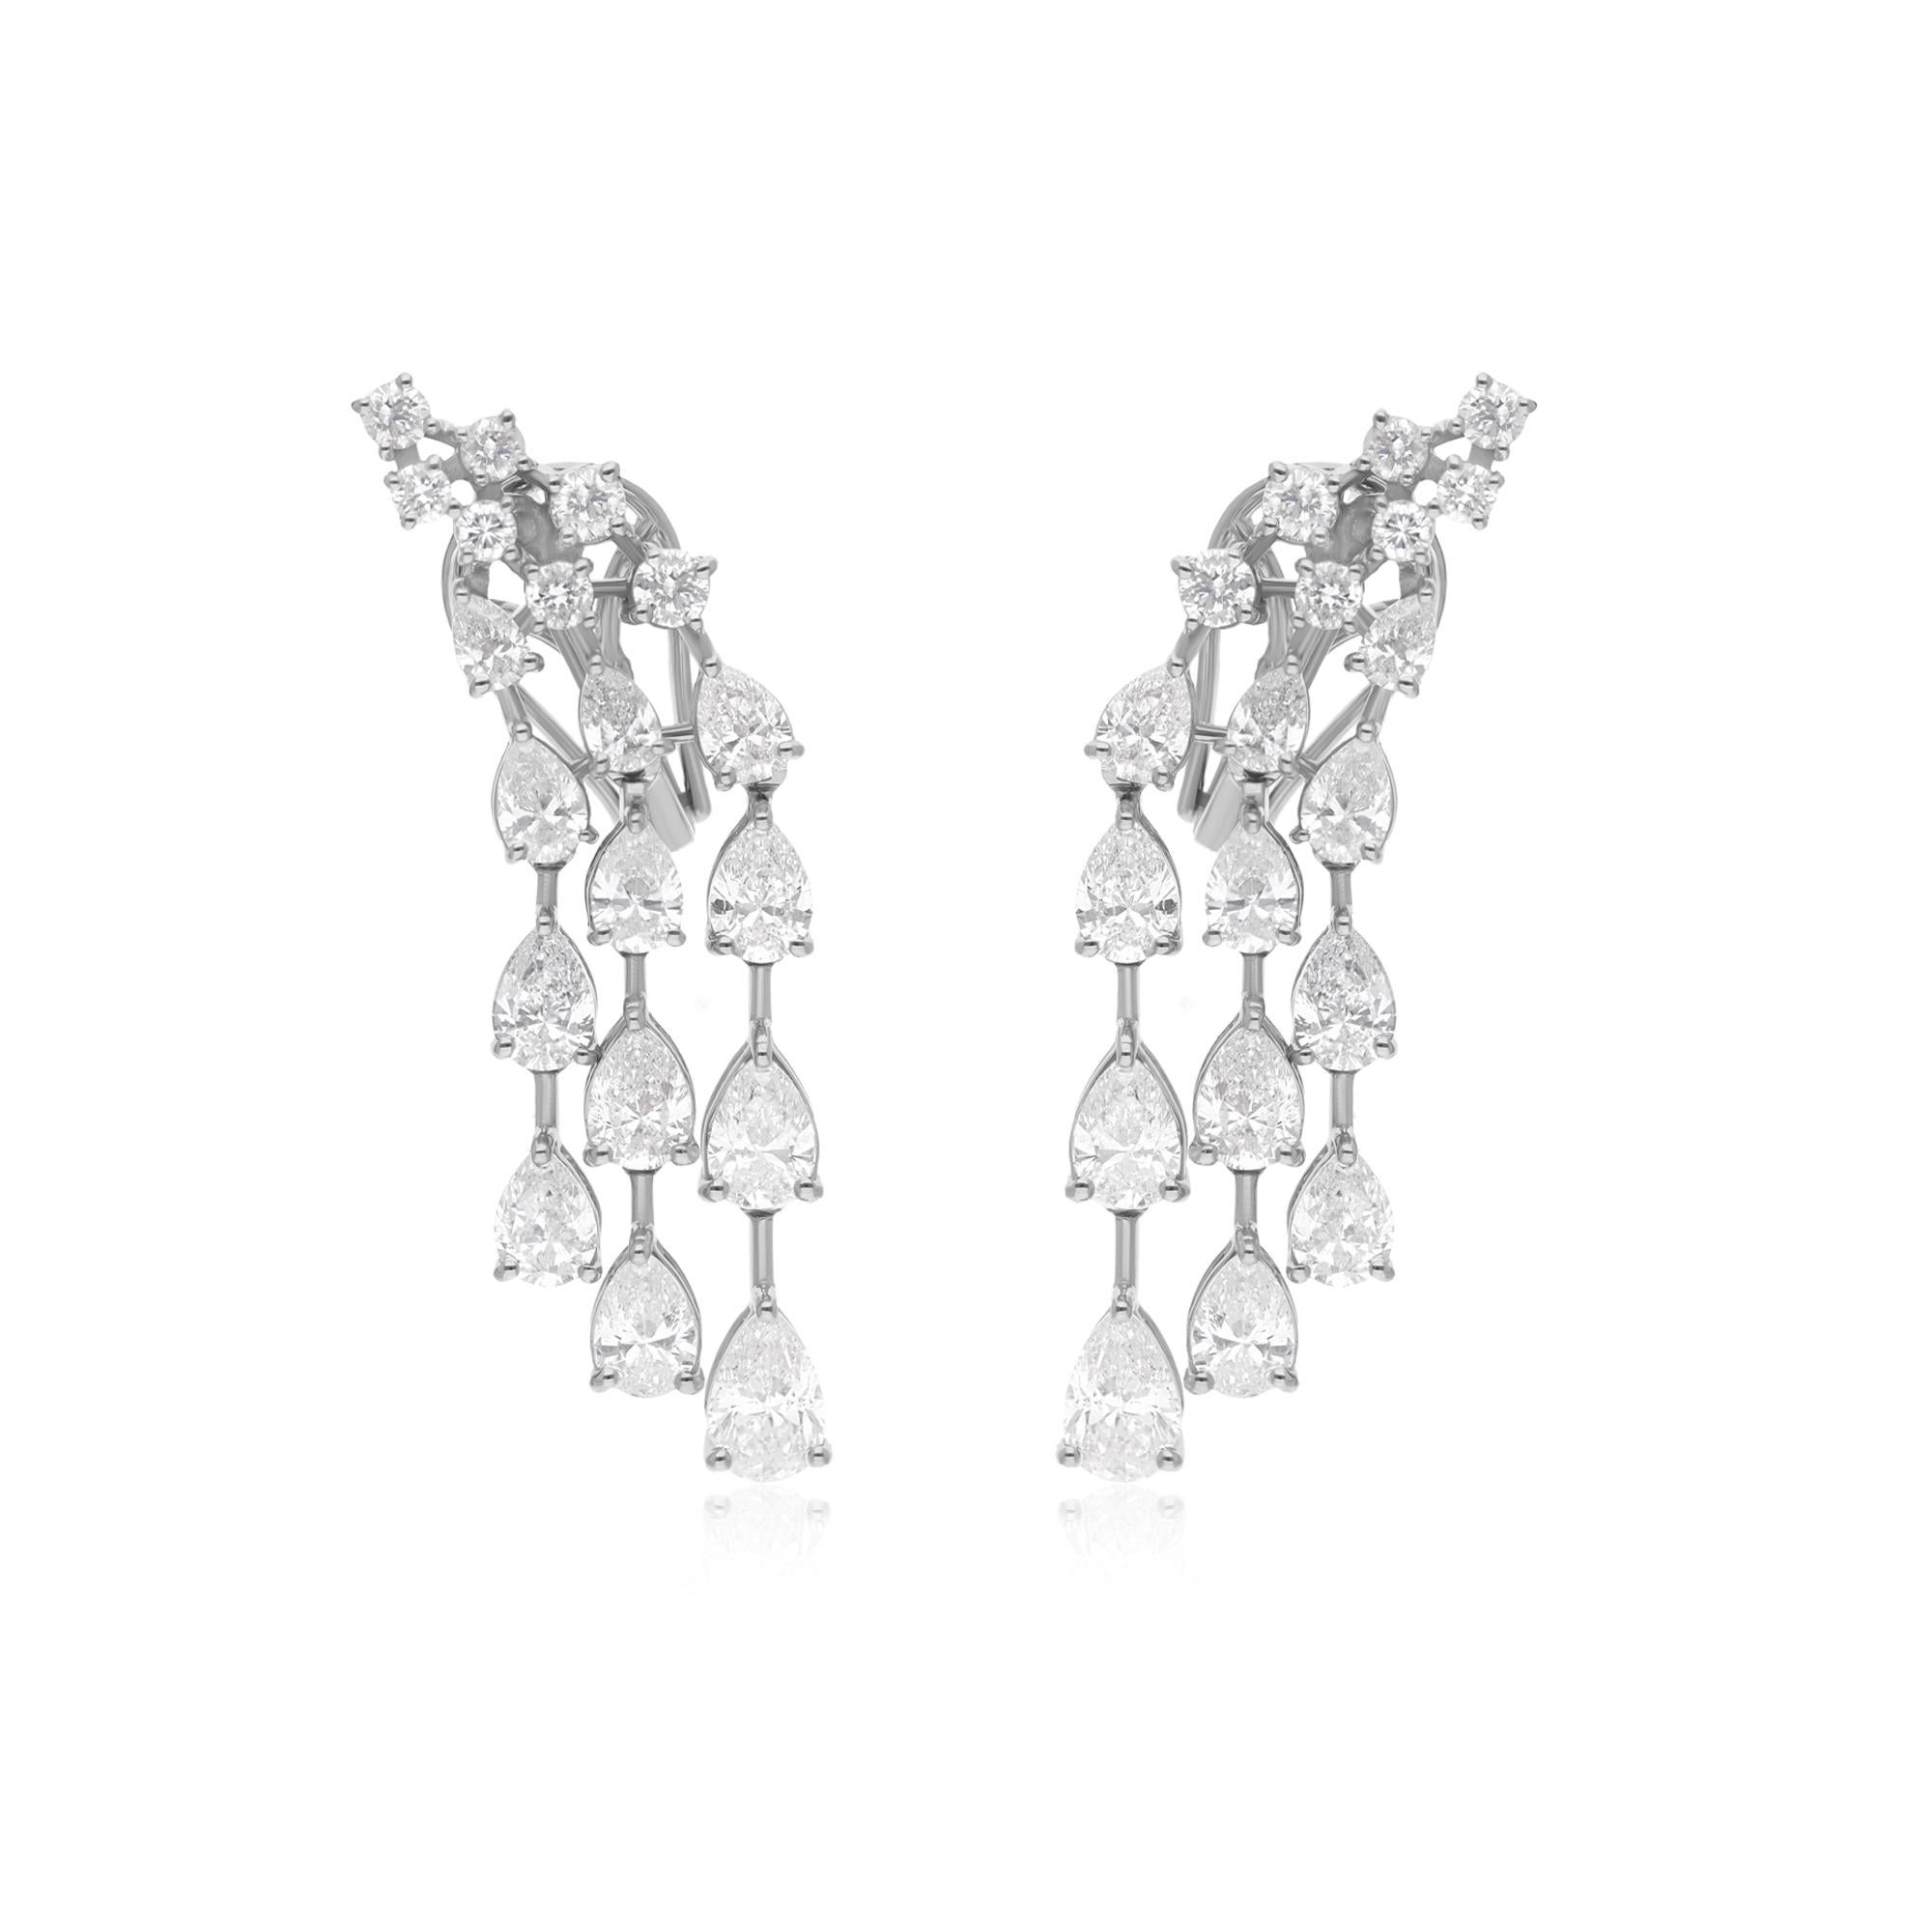 Each earring is a masterpiece of artisanal craftsmanship, meticulously created to embody elegance and charm. The dazzling array of diamonds adorning these earrings showcases the brilliance and fire of genuine gemstones, ensuring a captivating